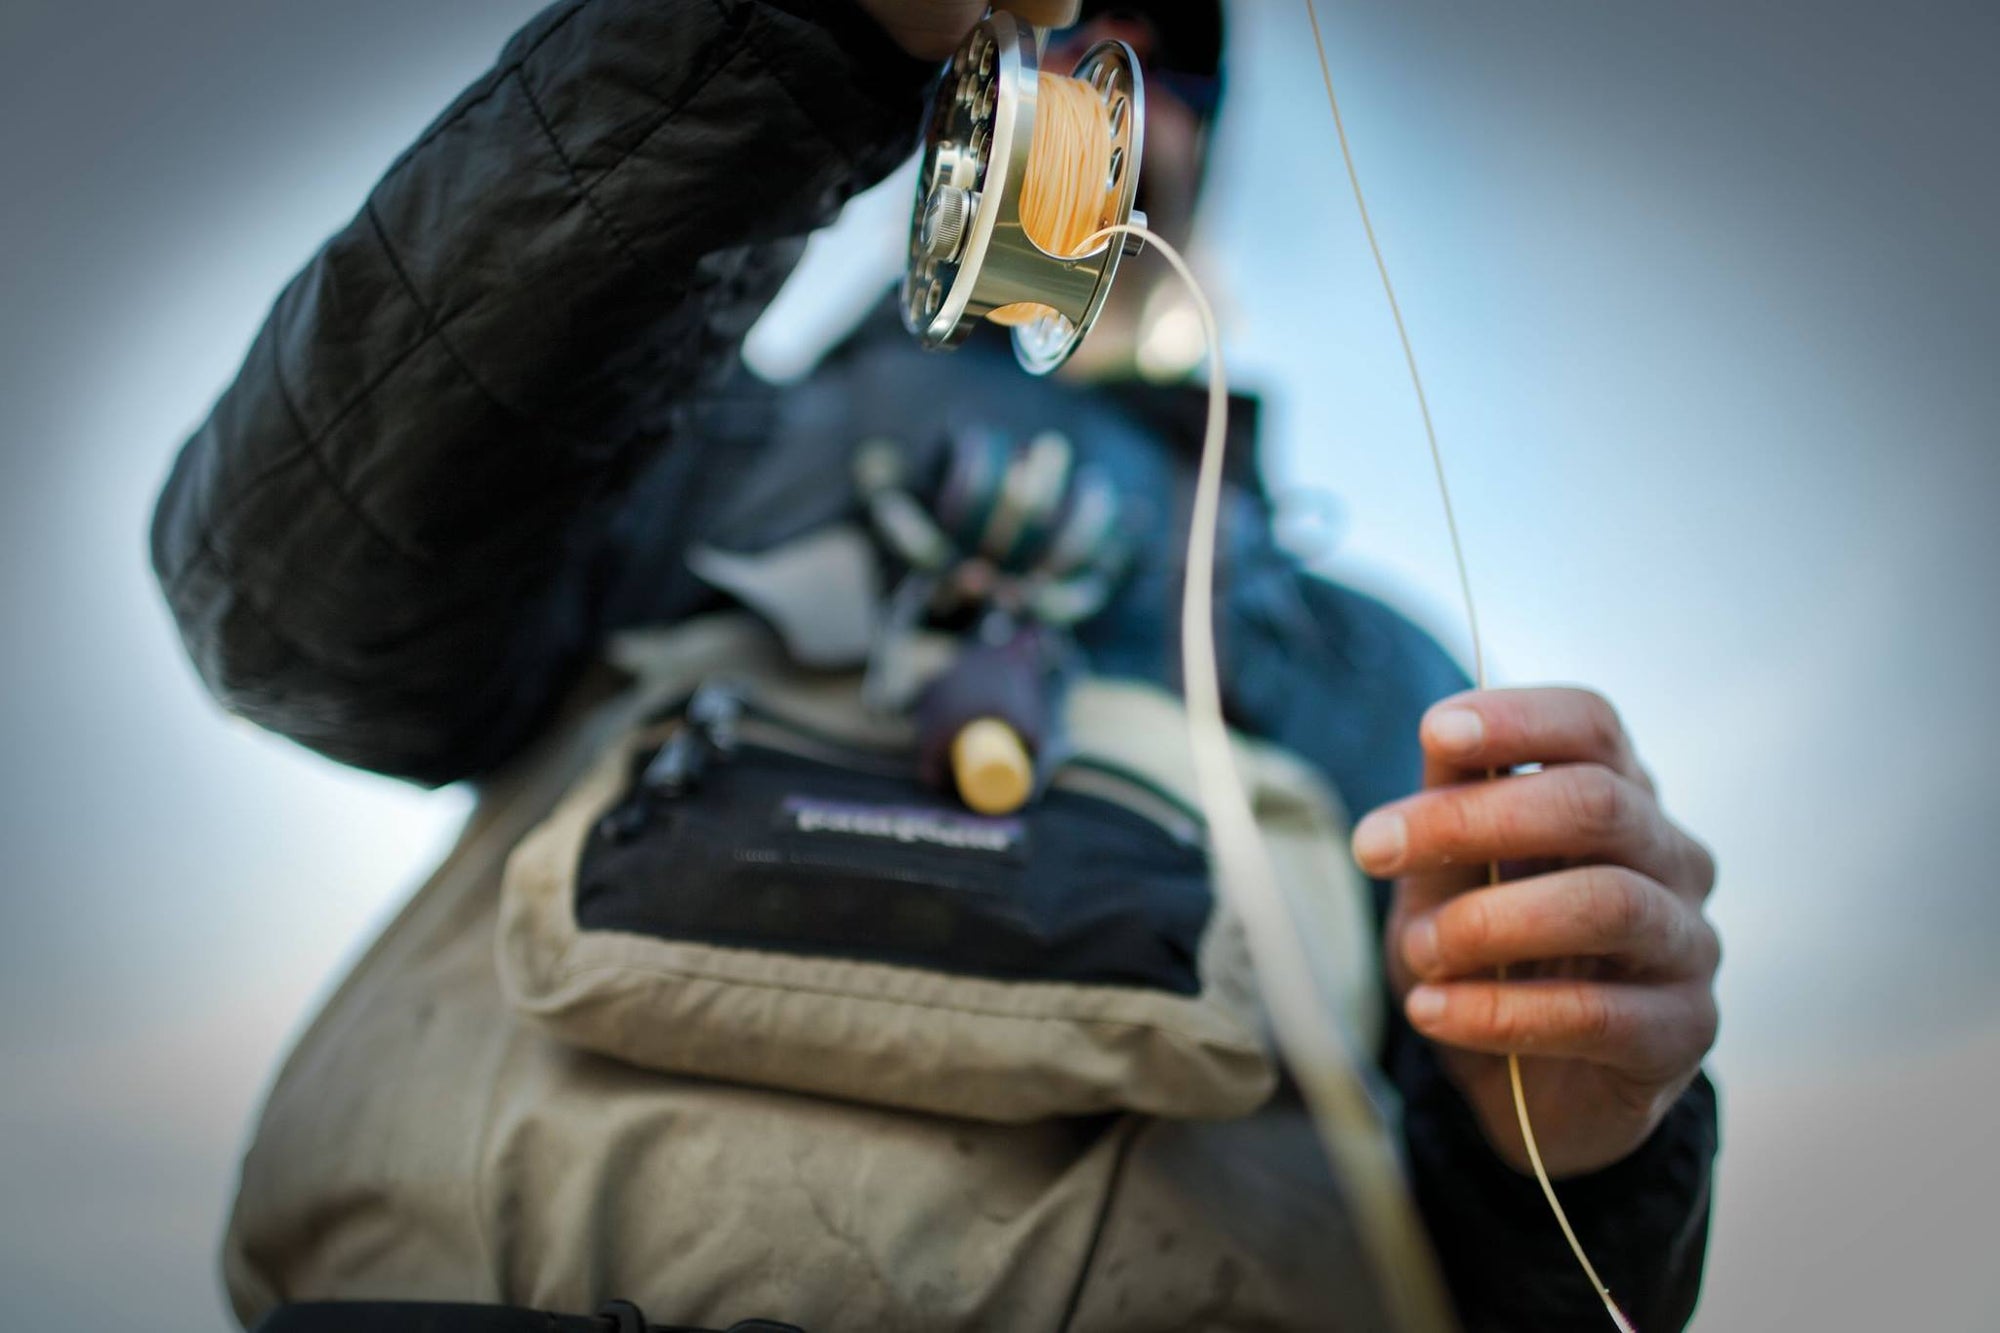 Bottom view of a fisherman holding onto his fly rod and reel